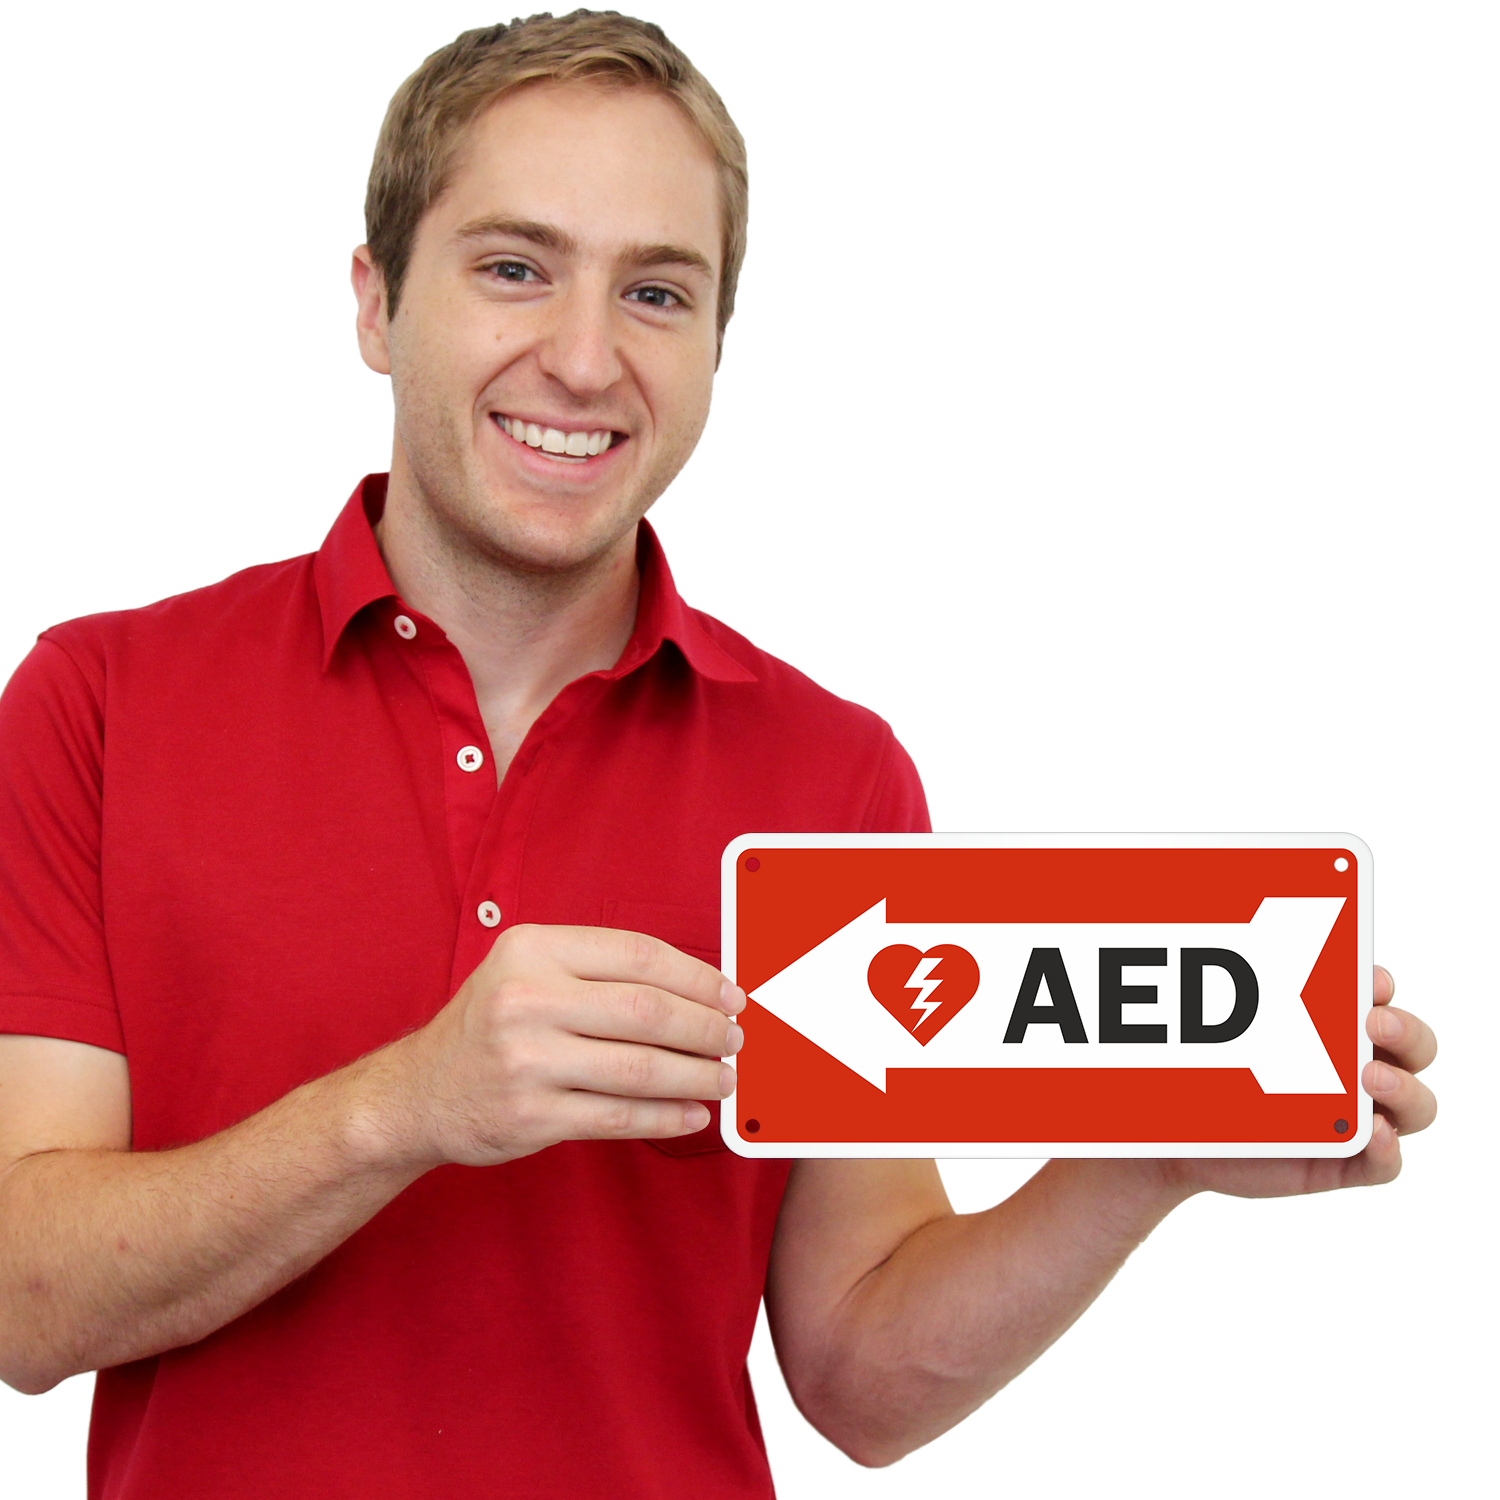 AED Directional Arrow Label